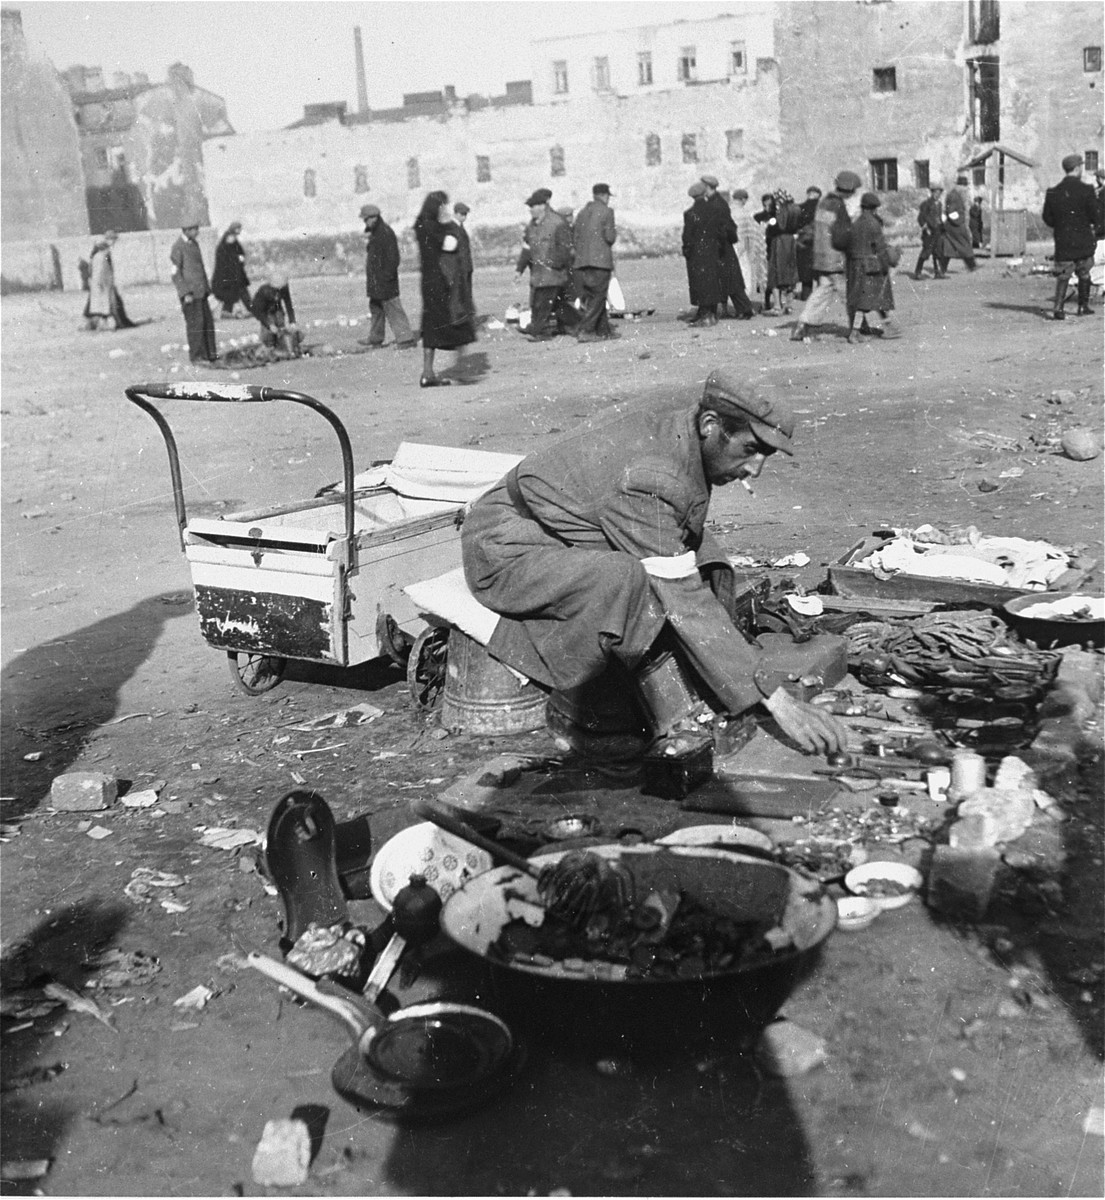 A man offers various items for sale on a lot in the Warsaw ghetto. 

Joest's original caption reads: "This man offered [for sale] nothing anyone could need: old pans, heavy, dented bowls, an old cauldron.  However, he had to try any way he could to make money to live."